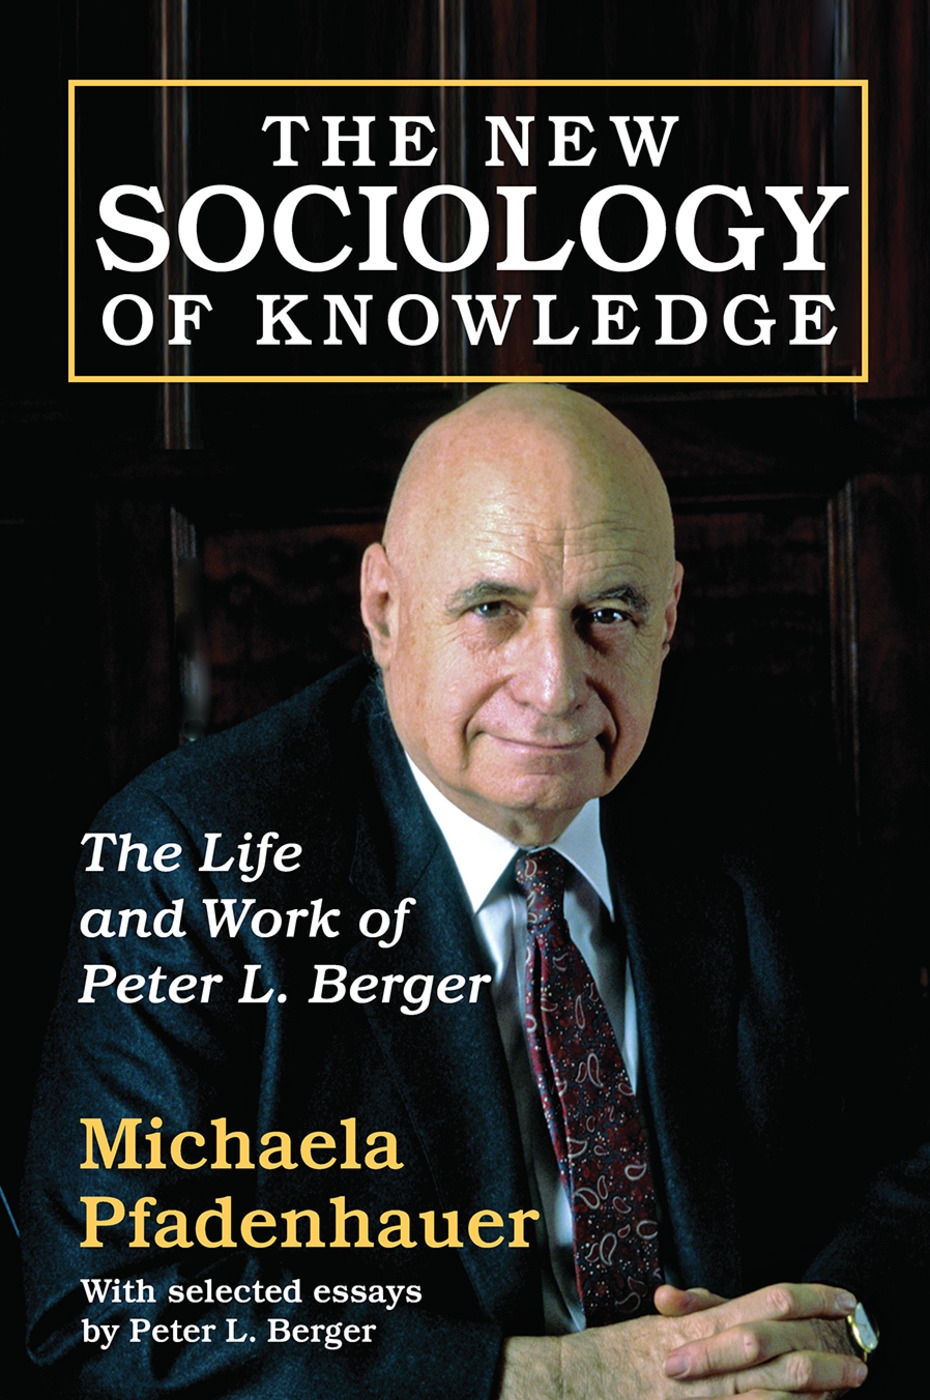 The New Sociology of Knowledge: The Life and Work of Peter L. Berger